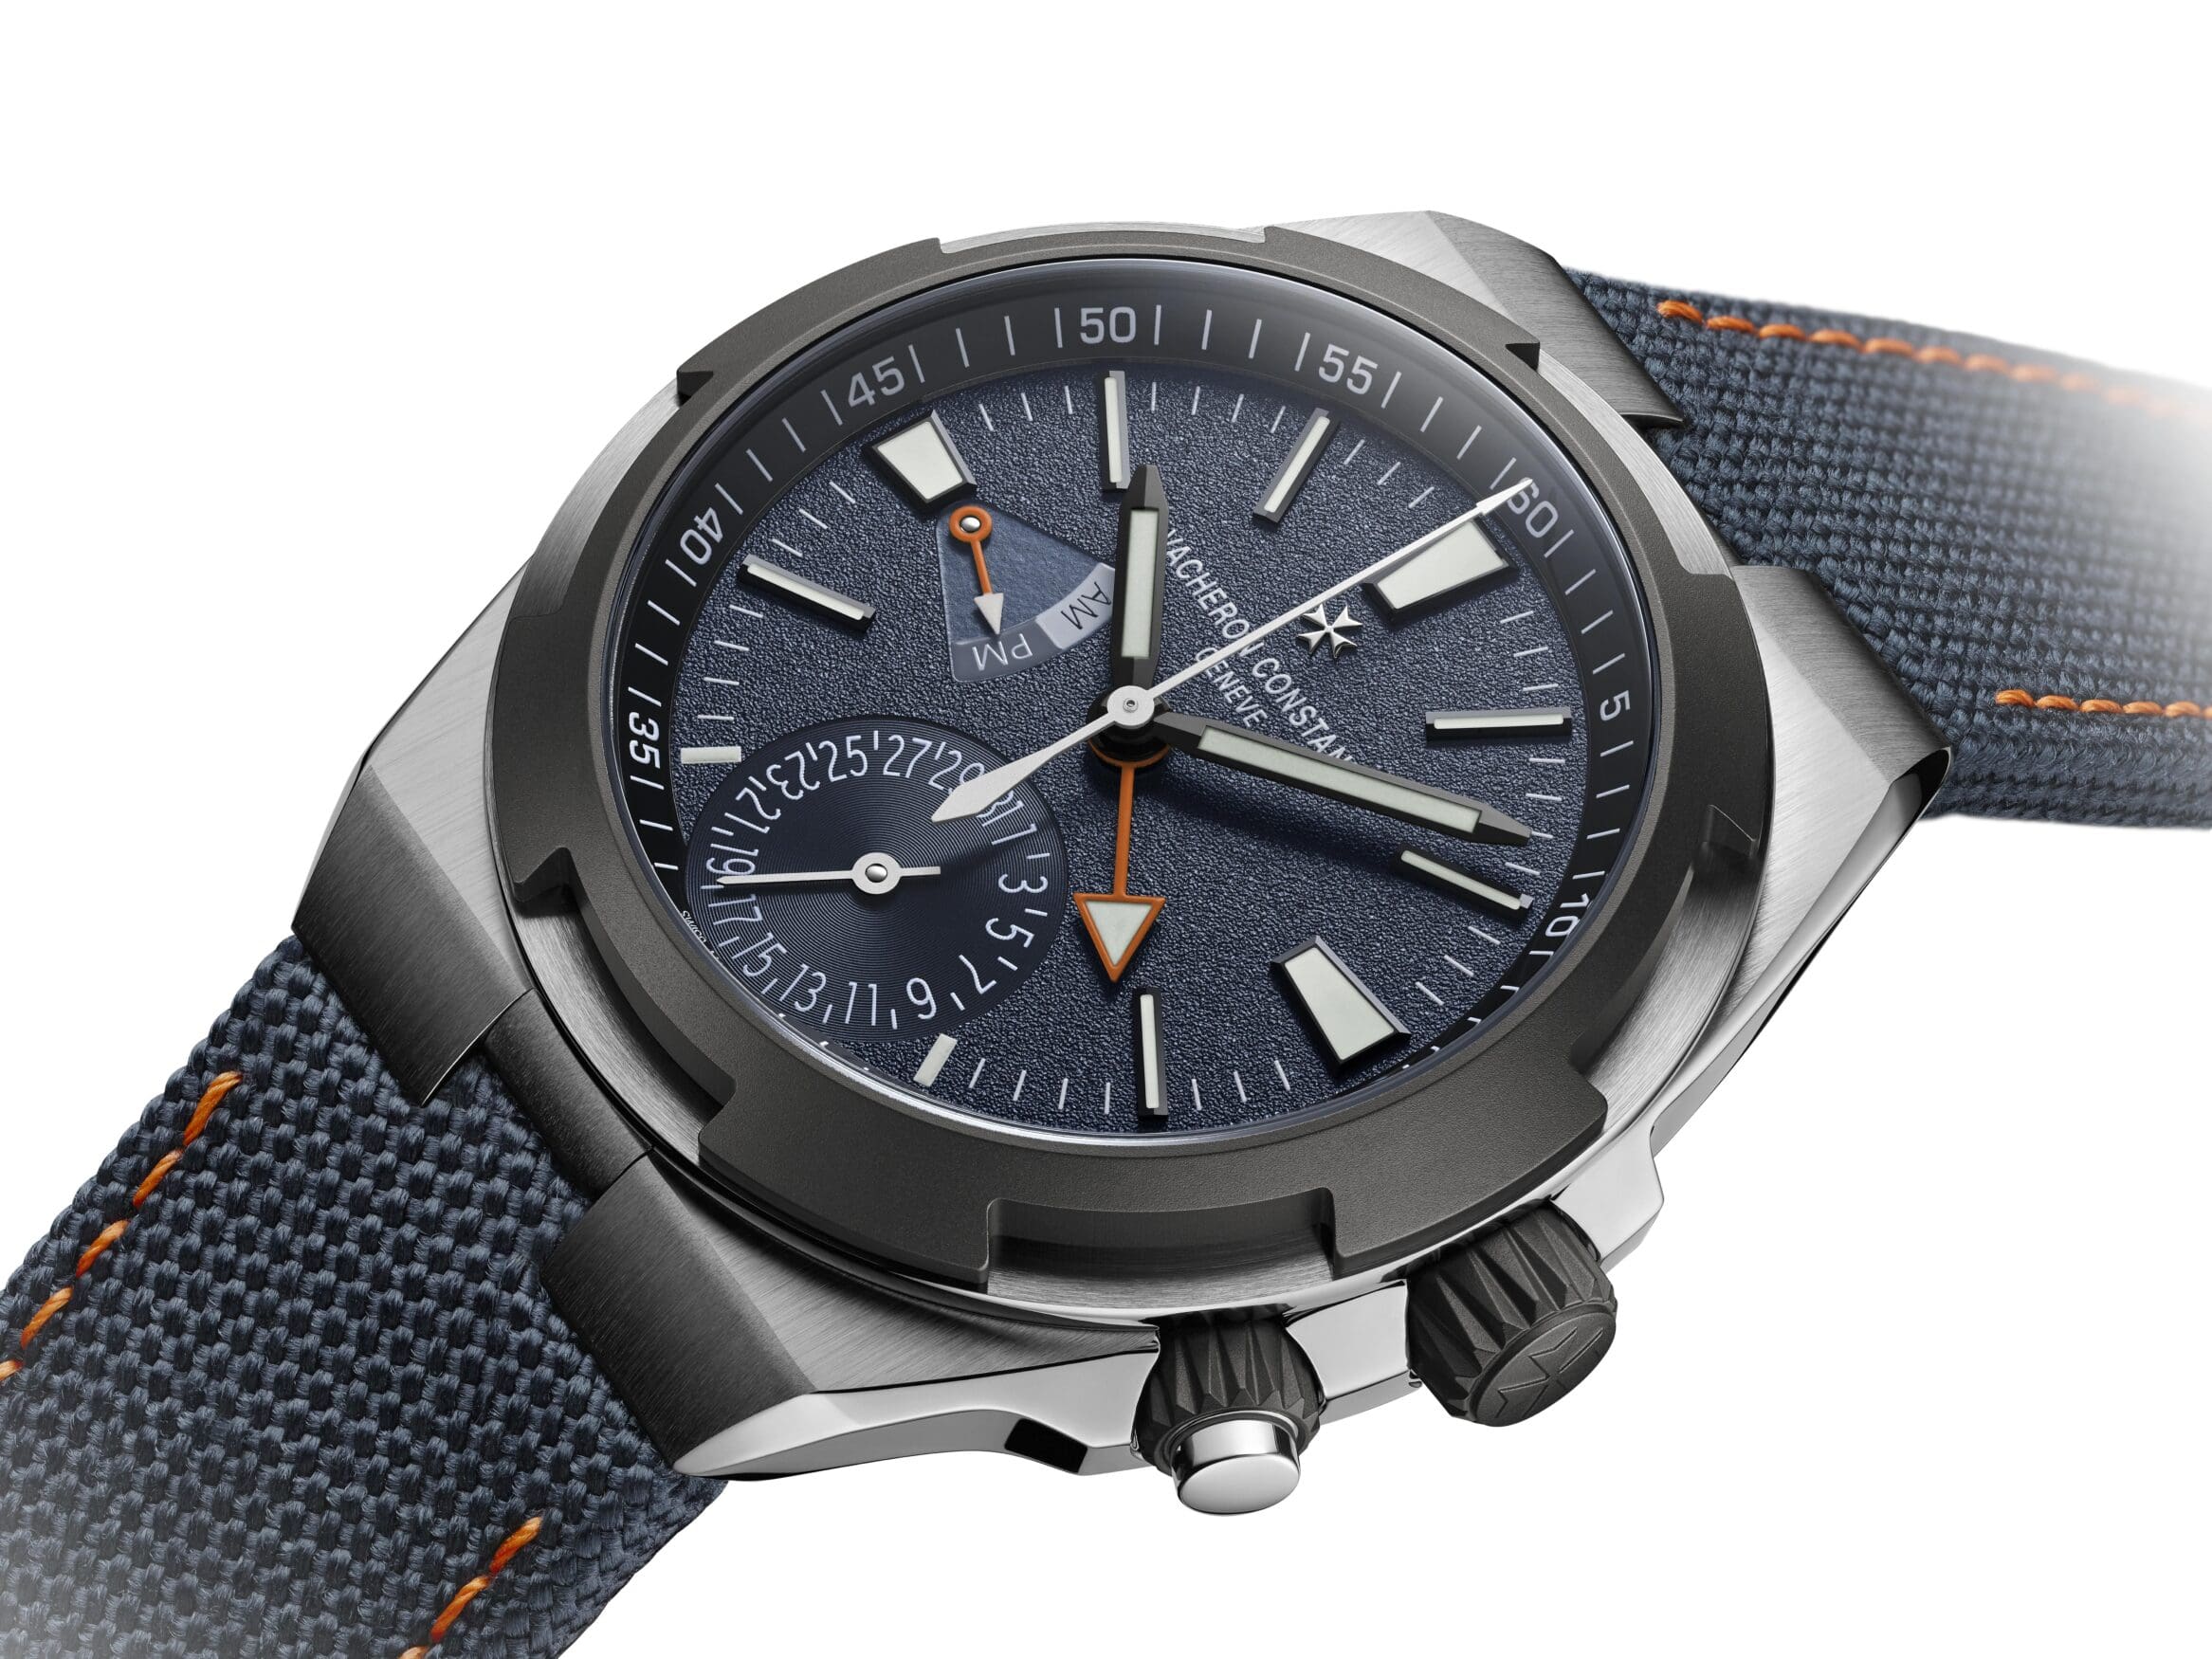 INTRODUCING: The Vacheron Constantin Overseas Limited Editions “Everest”